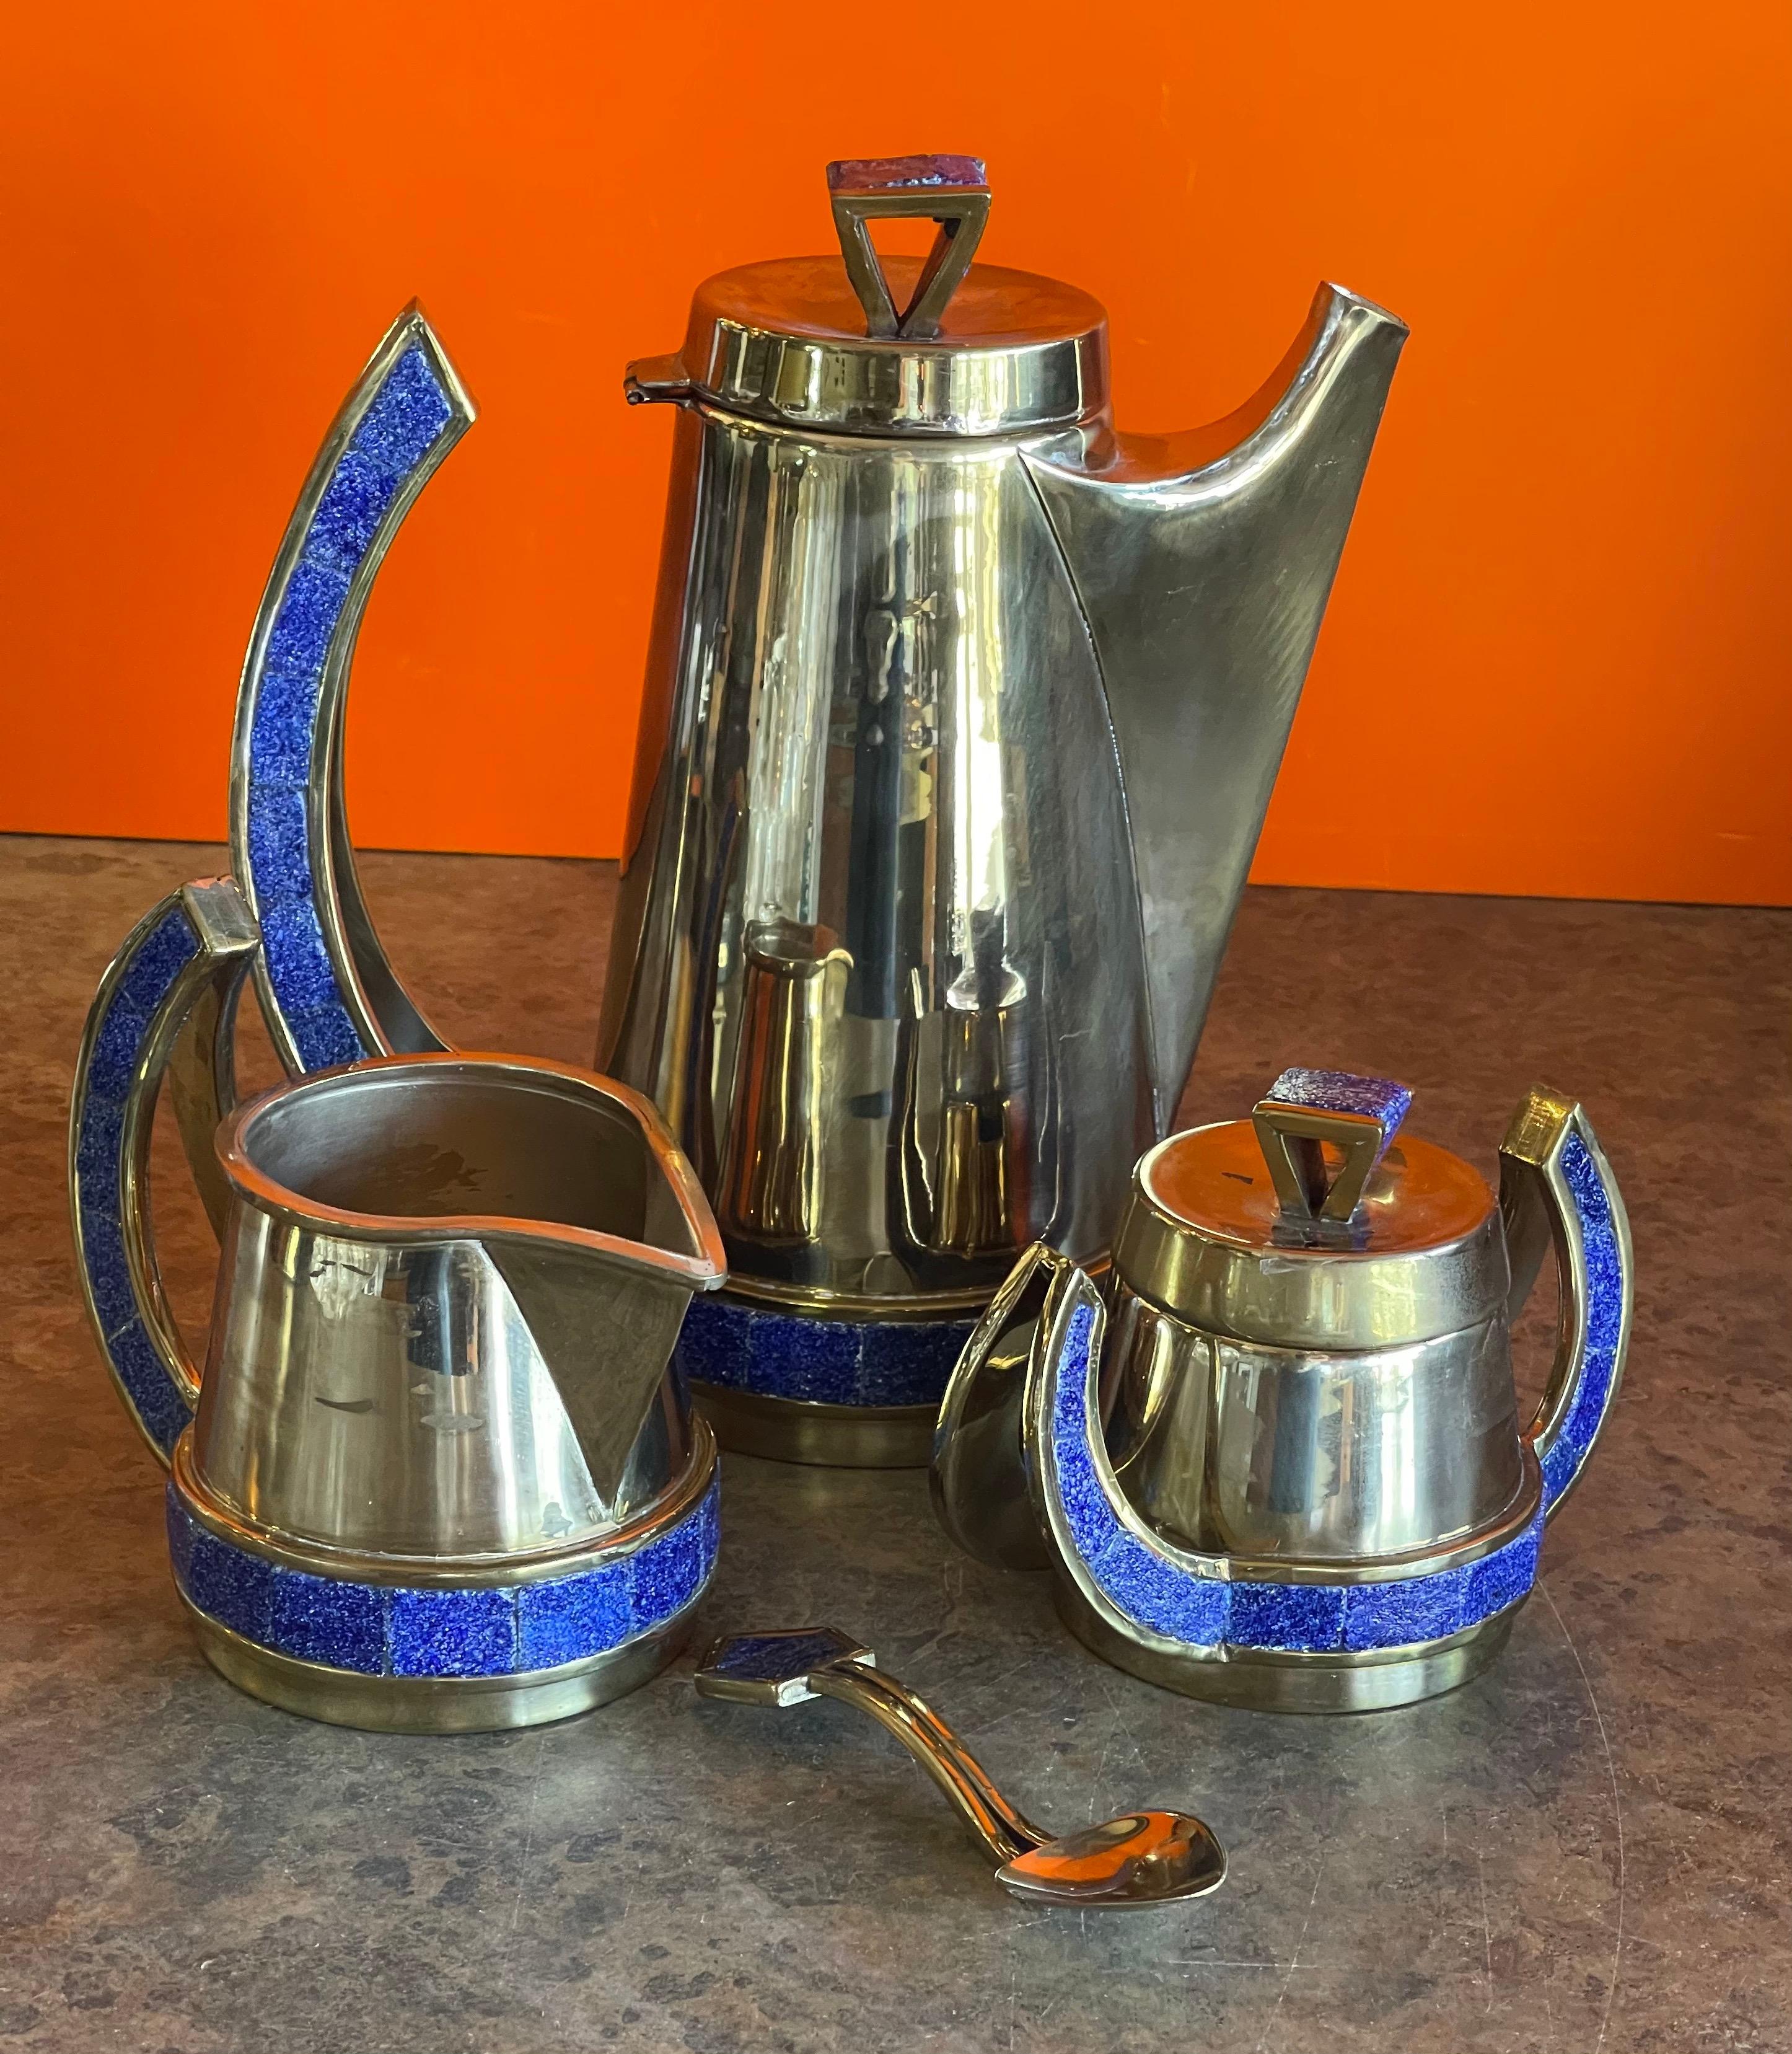 Stylish Mexican plated metal & turquoise four piece coffee service set circa 1970's. The set has a coffee pot, creamer, lidded sugar bowl and a spoon which have bright blue turquoise inlaid handles and accents. The coffee pot is 7